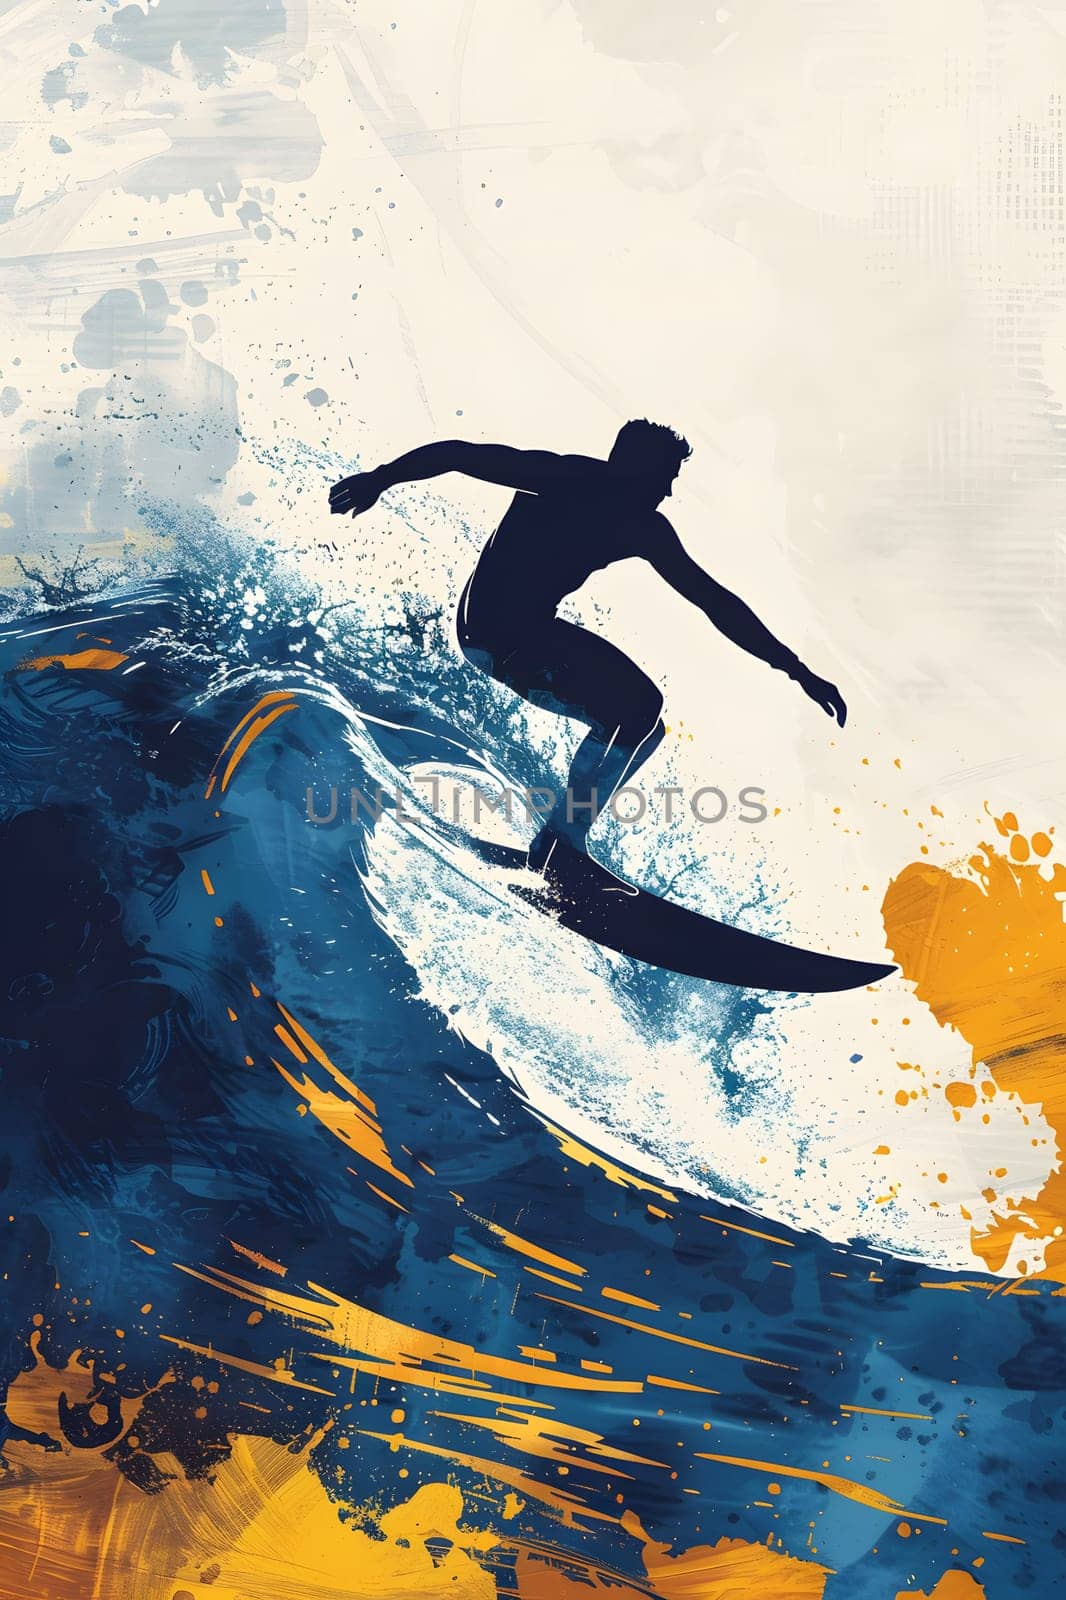 A person is surfing on a surfboard, riding a wind wave in the ocean, enjoying the fluid motion of water and the recreation of surfing